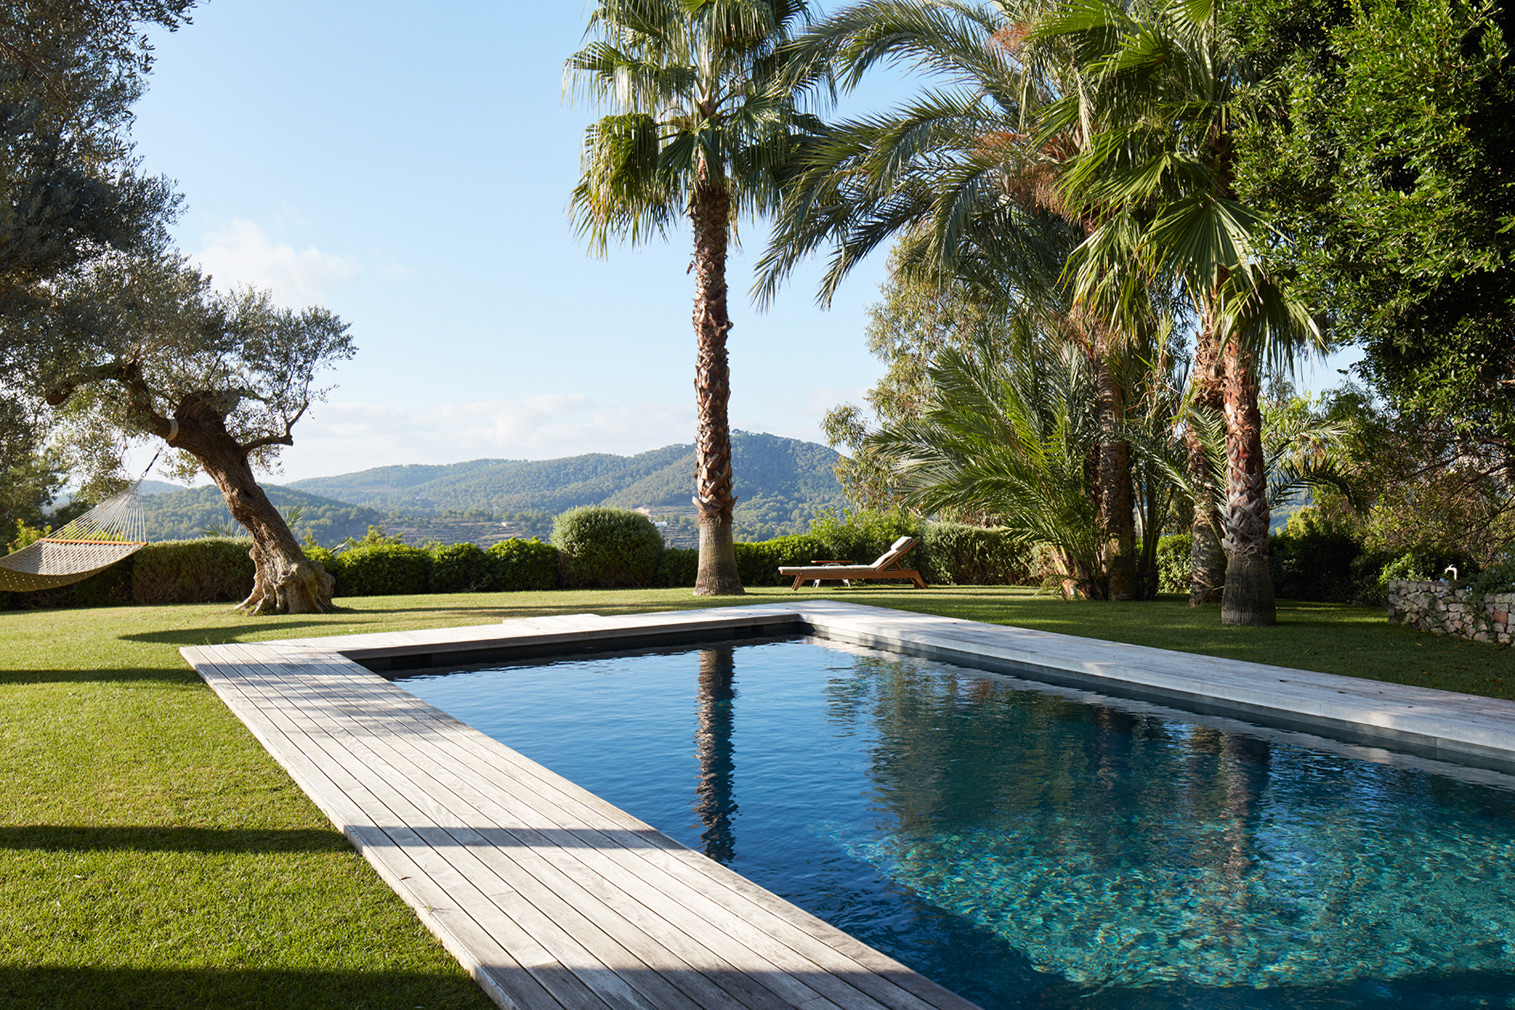 Ibiza holiday home for sale via Sotheby's International Realty